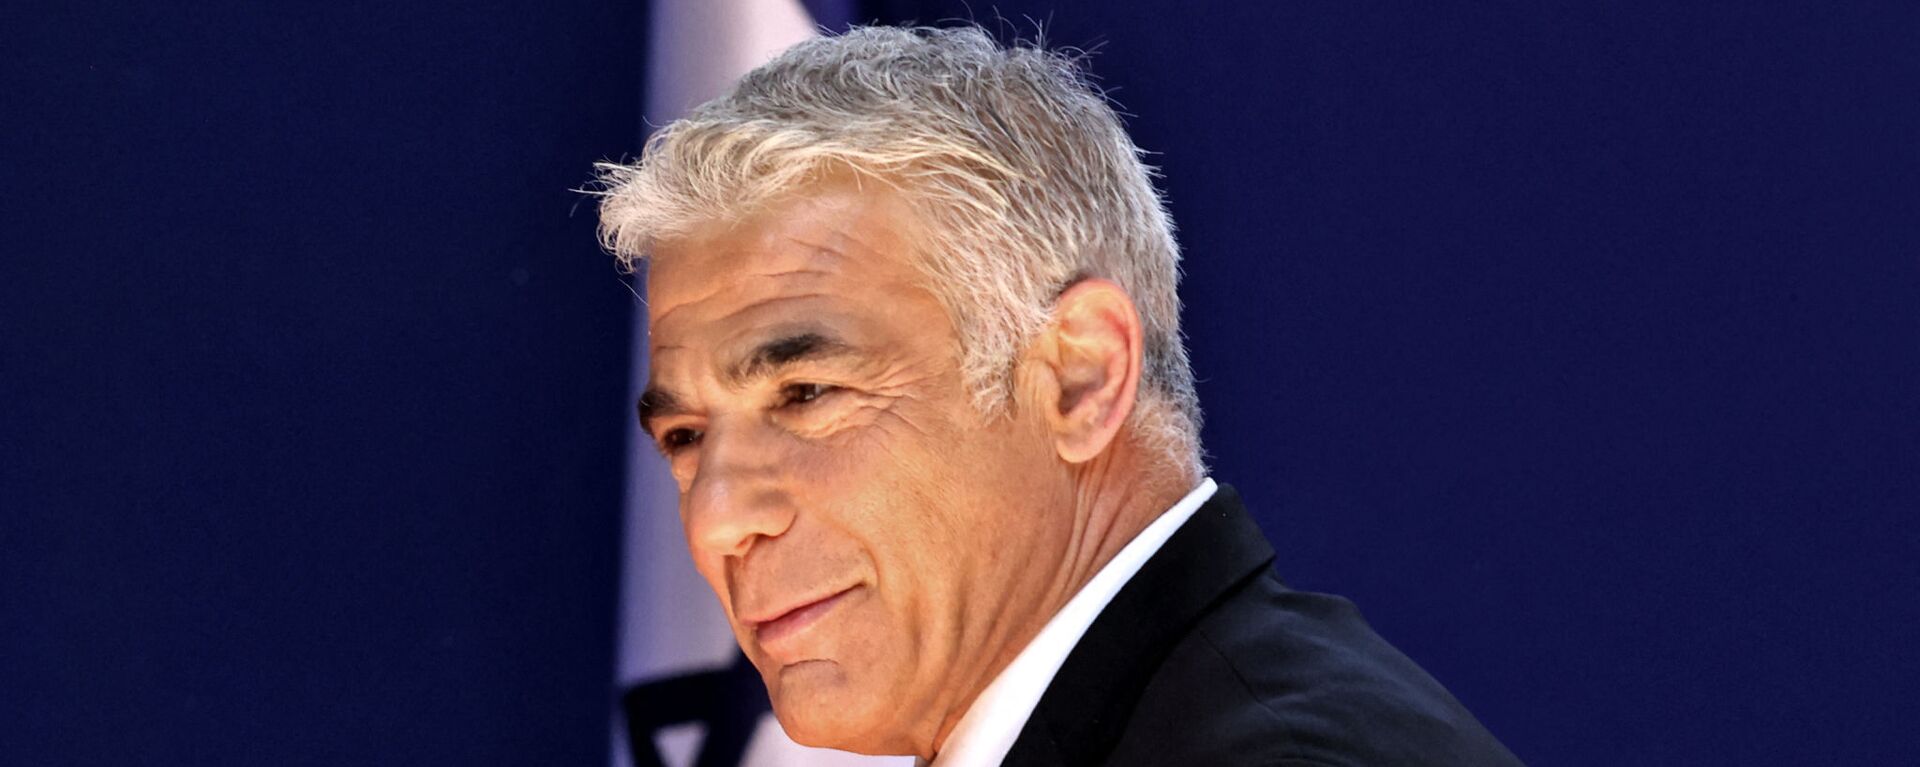 Israeli alternate Prime Minister and Foreign Minister Yair Lapid arrives for a photo at the President's residence during a ceremony for the new coalition government in Jerusalem, on June 14, 2021. - A motley alliance of Israeli parties on June 13 ended Benjamin Netanyahu's 12 straight years as prime minister, as parliament voted in a new government led by his former ally, right-wing Jewish nationalist Naftali Bennett. - Sputnik International, 1920, 03.05.2022